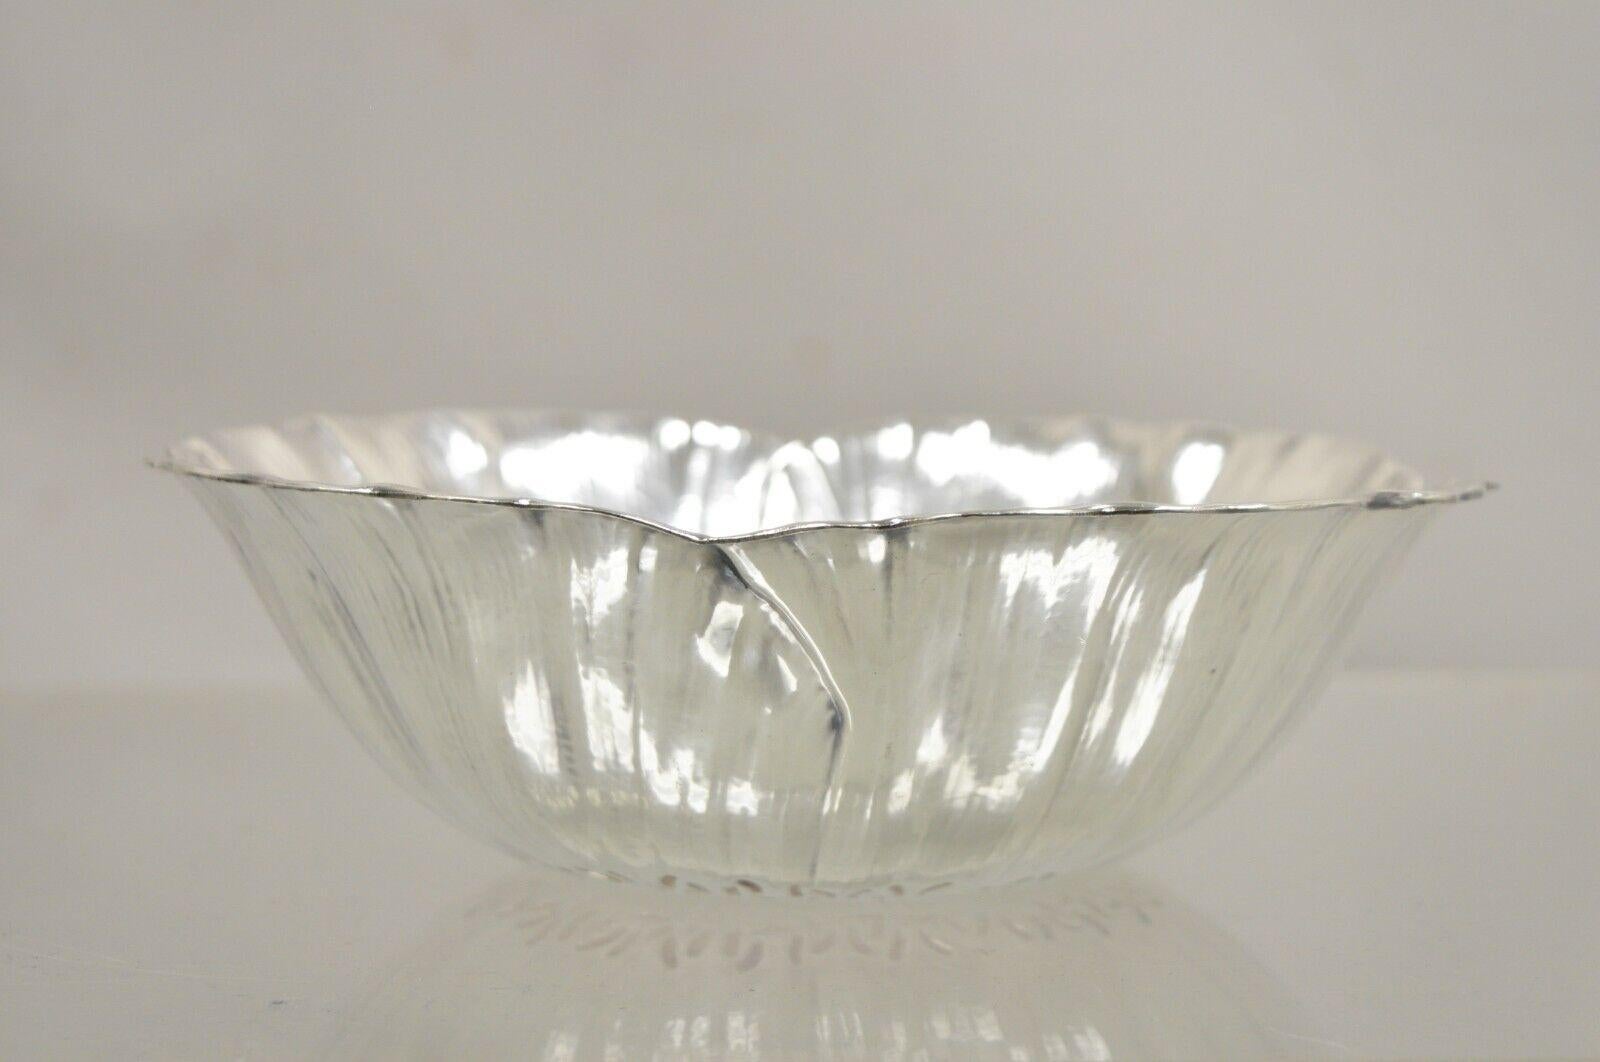 Vintage Wilcox International Silver 5635 Silver Plated Sunflower Tulip Fruit Bowl. Circa Mid 20th Century. Measurements: 2.5